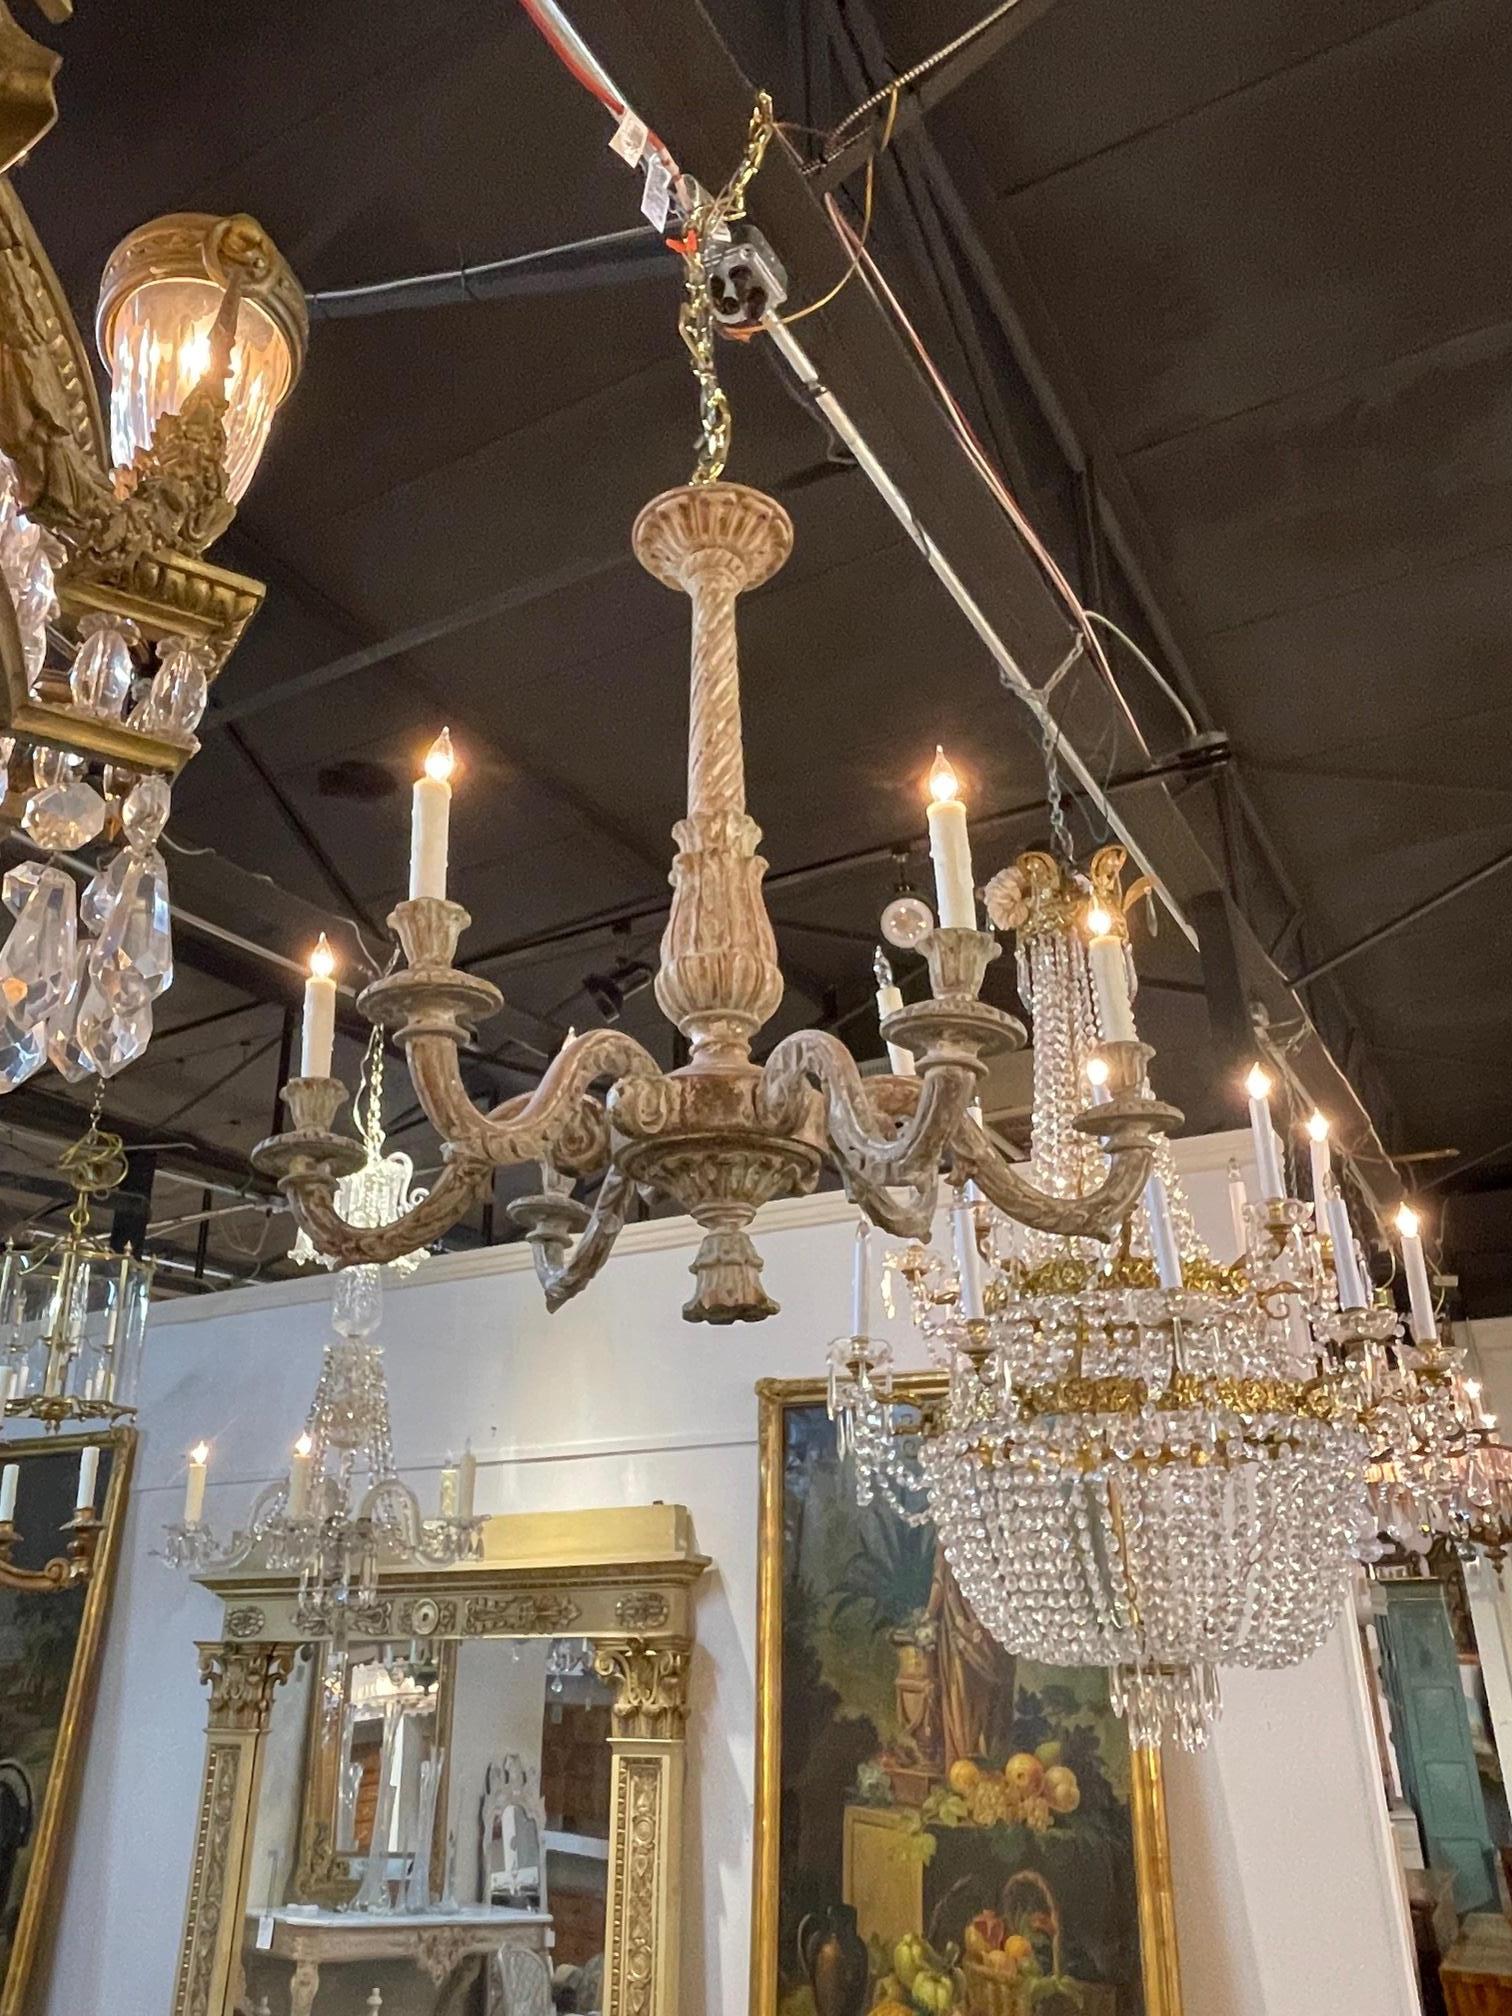 19th century Italian carved and painted 6 light chandelier, Circa 1880.
The chandelier has been professionally re-wired, cleaned and is ready to hang. Includes matching chain and canopy.